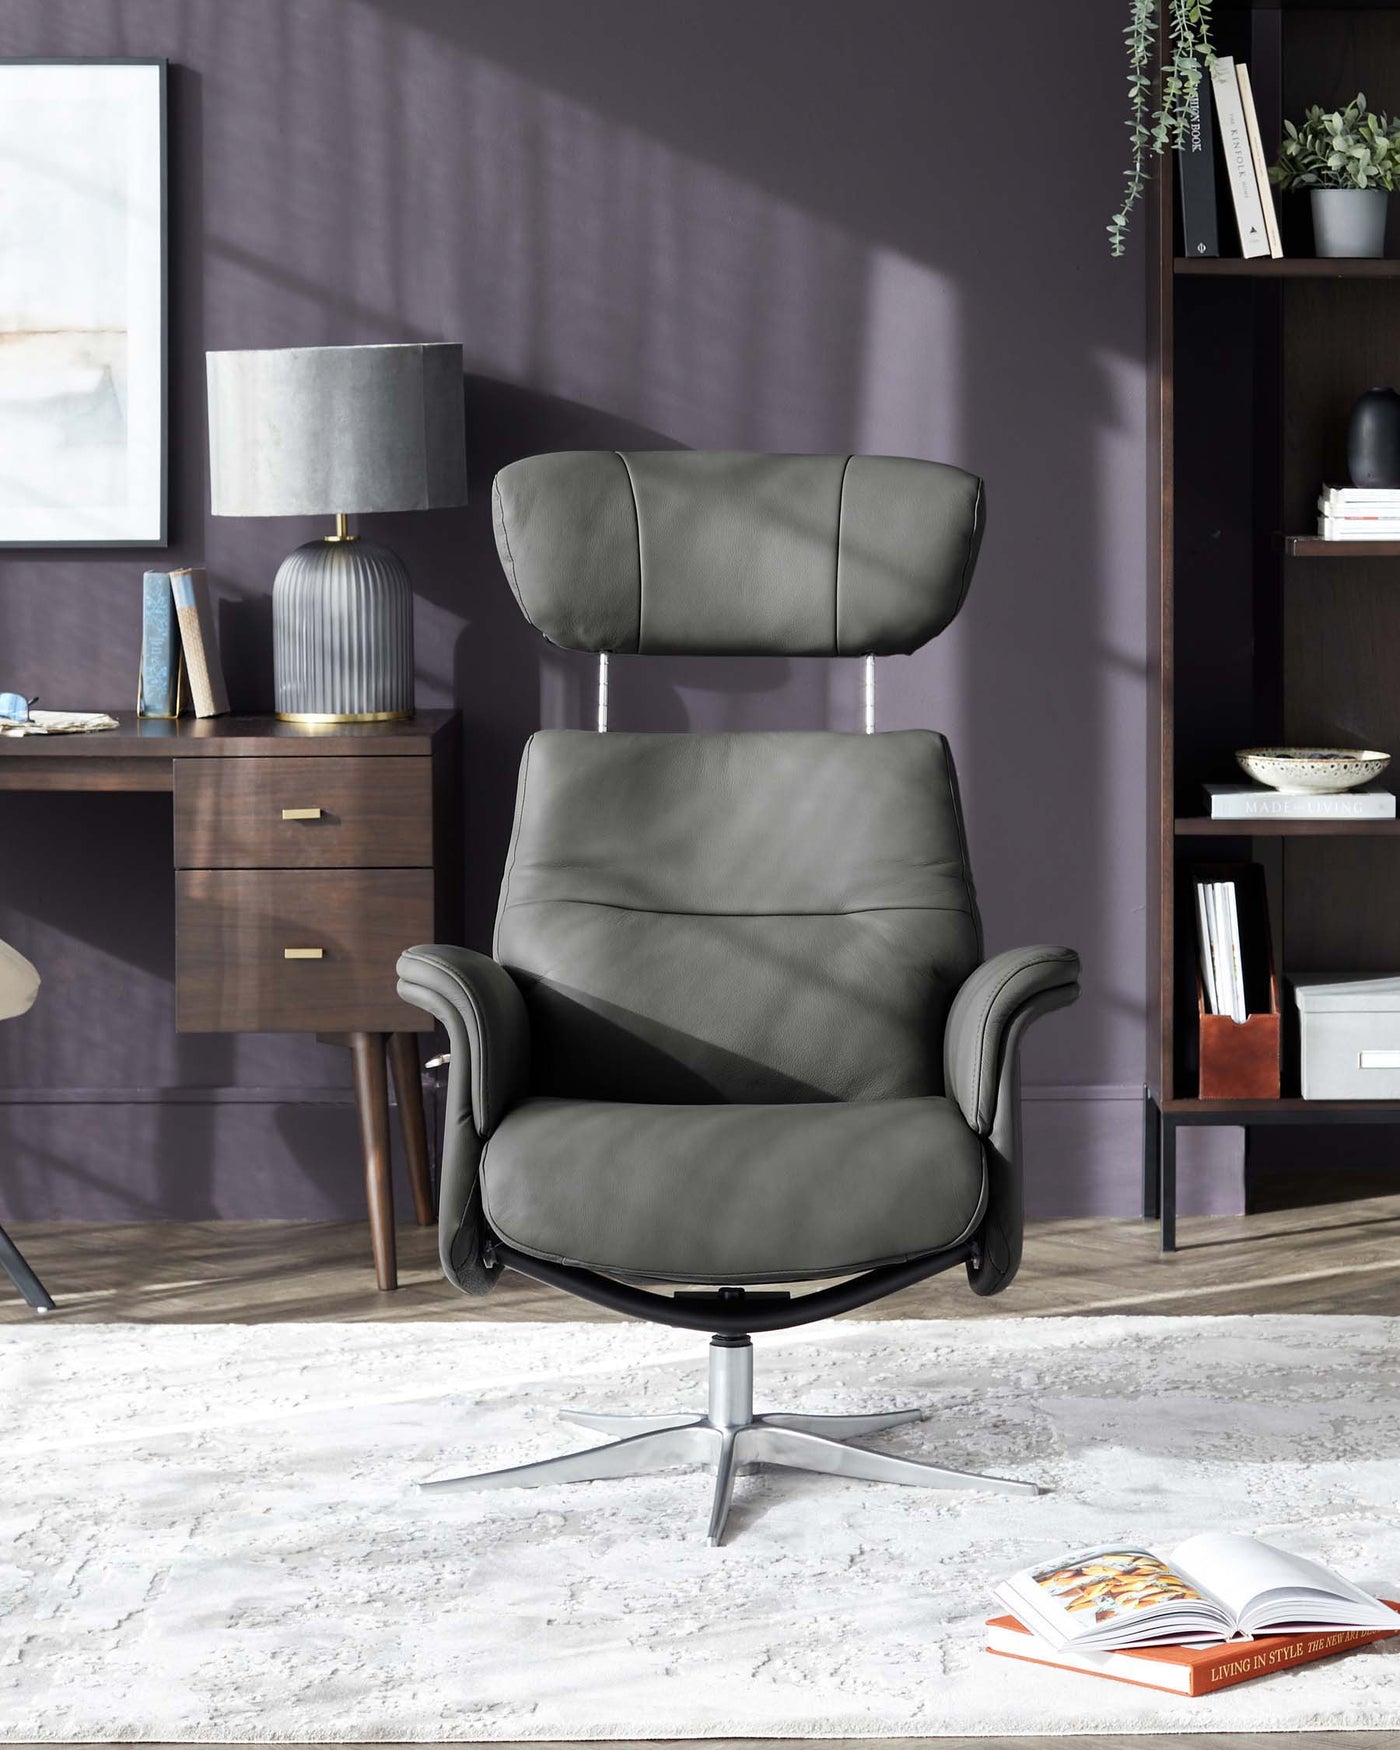 Modern black leather office chair with a high back, padded headrest, and armrests, featuring a swivel base with five castors. The chair is set in a stylish room with a dark brown wooden side table, a contemporary grey table lamp, bookshelves, and décor, complemented by a grey wall and plush white area rug.